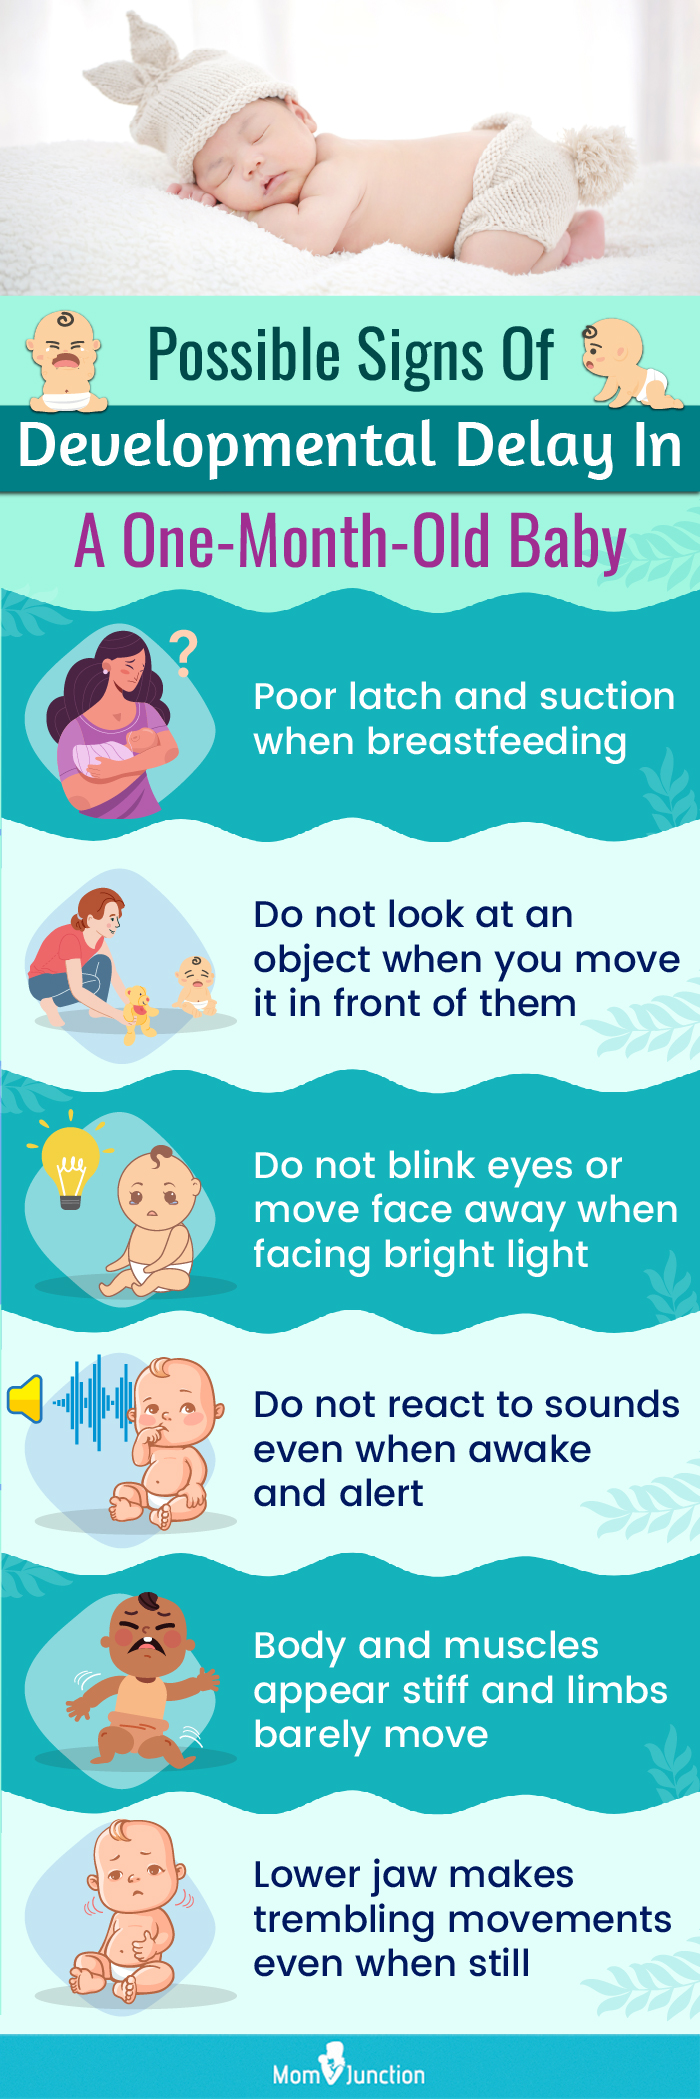 possible signs of developmental delay in a one month old baby (infographic)